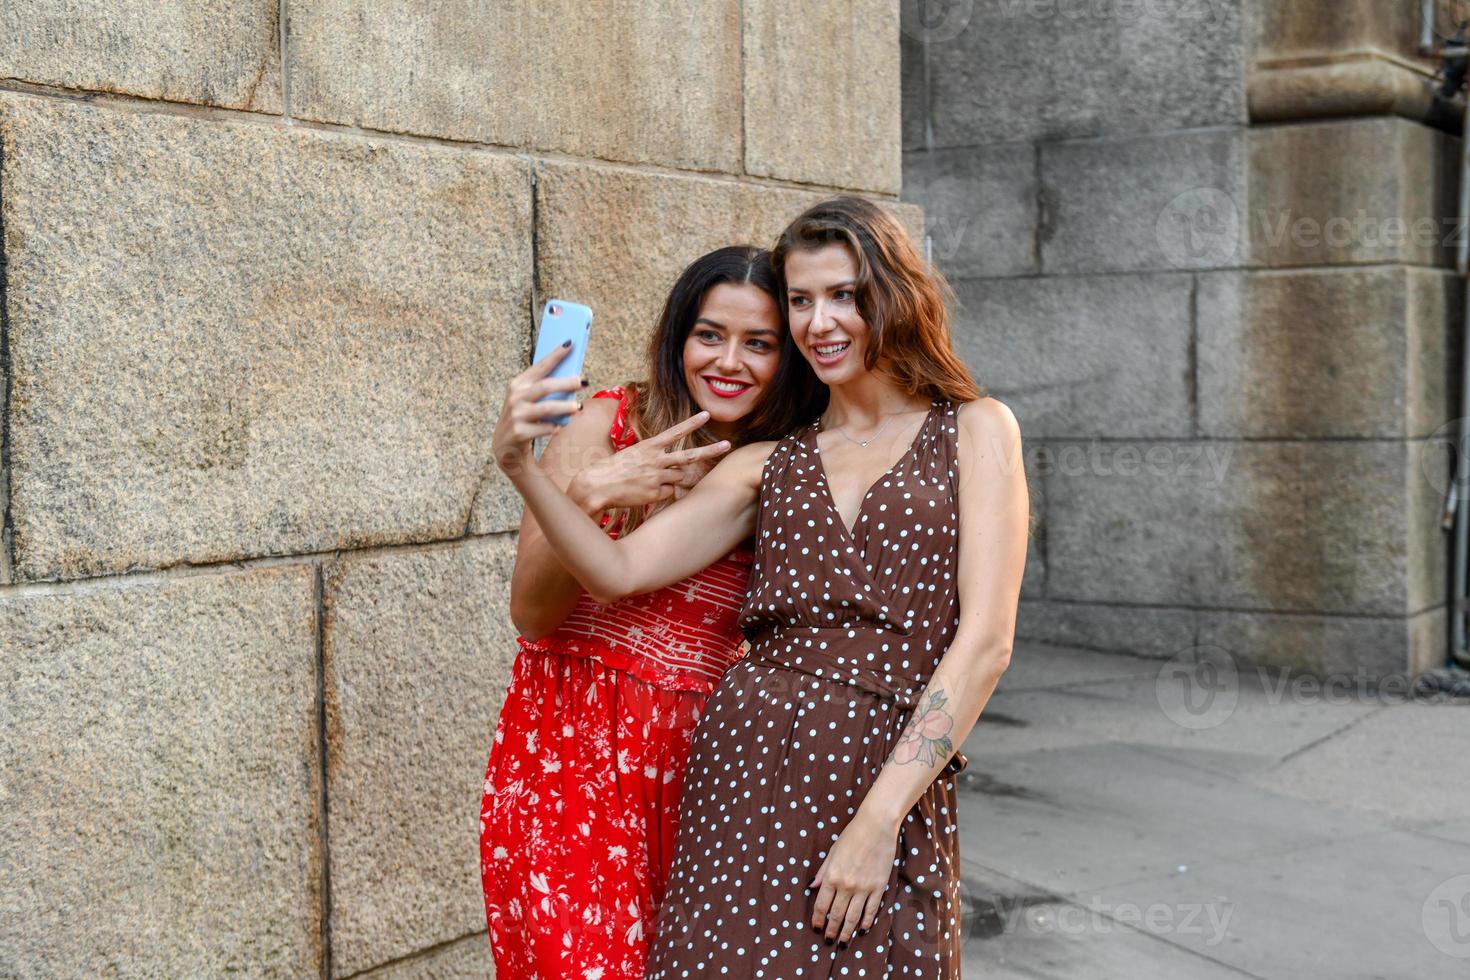 Two girls interacting with a mobile phone and taking silly selfie photos in New York City